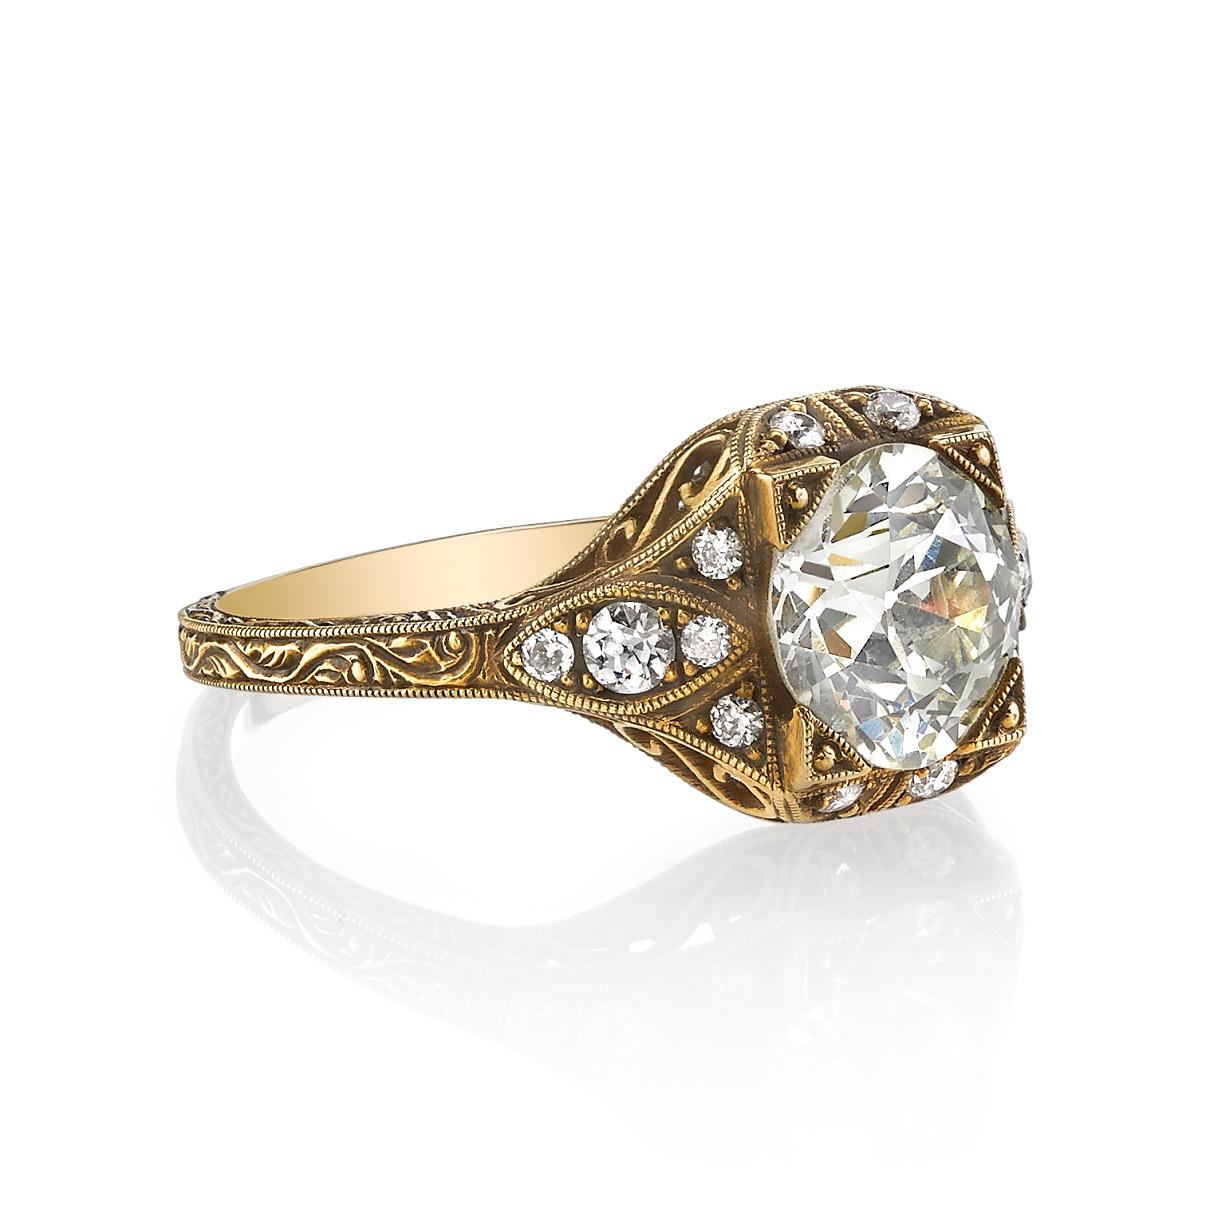 1.72ct MN/VS old European cut diamond with 0.19ctw diamond accents set in a handcrafted 18K oxidized yellow gold mounting. Ring is currently a size 6 and can be sized to fit.